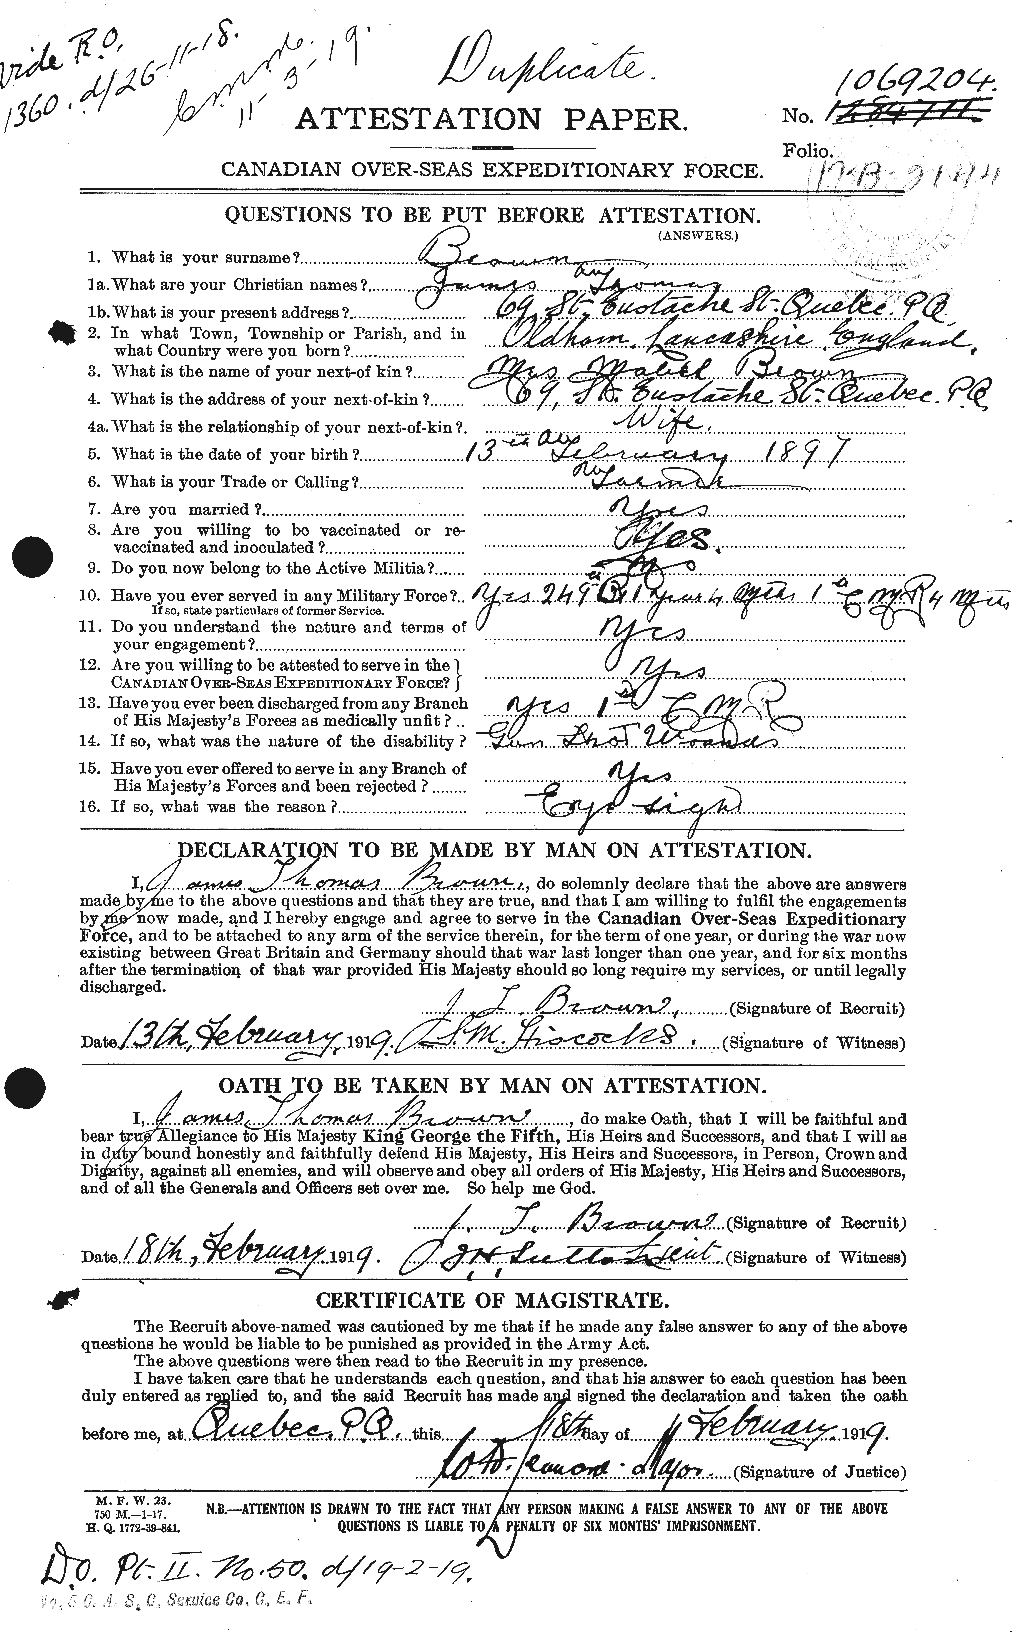 Personnel Records of the First World War - CEF 269588a